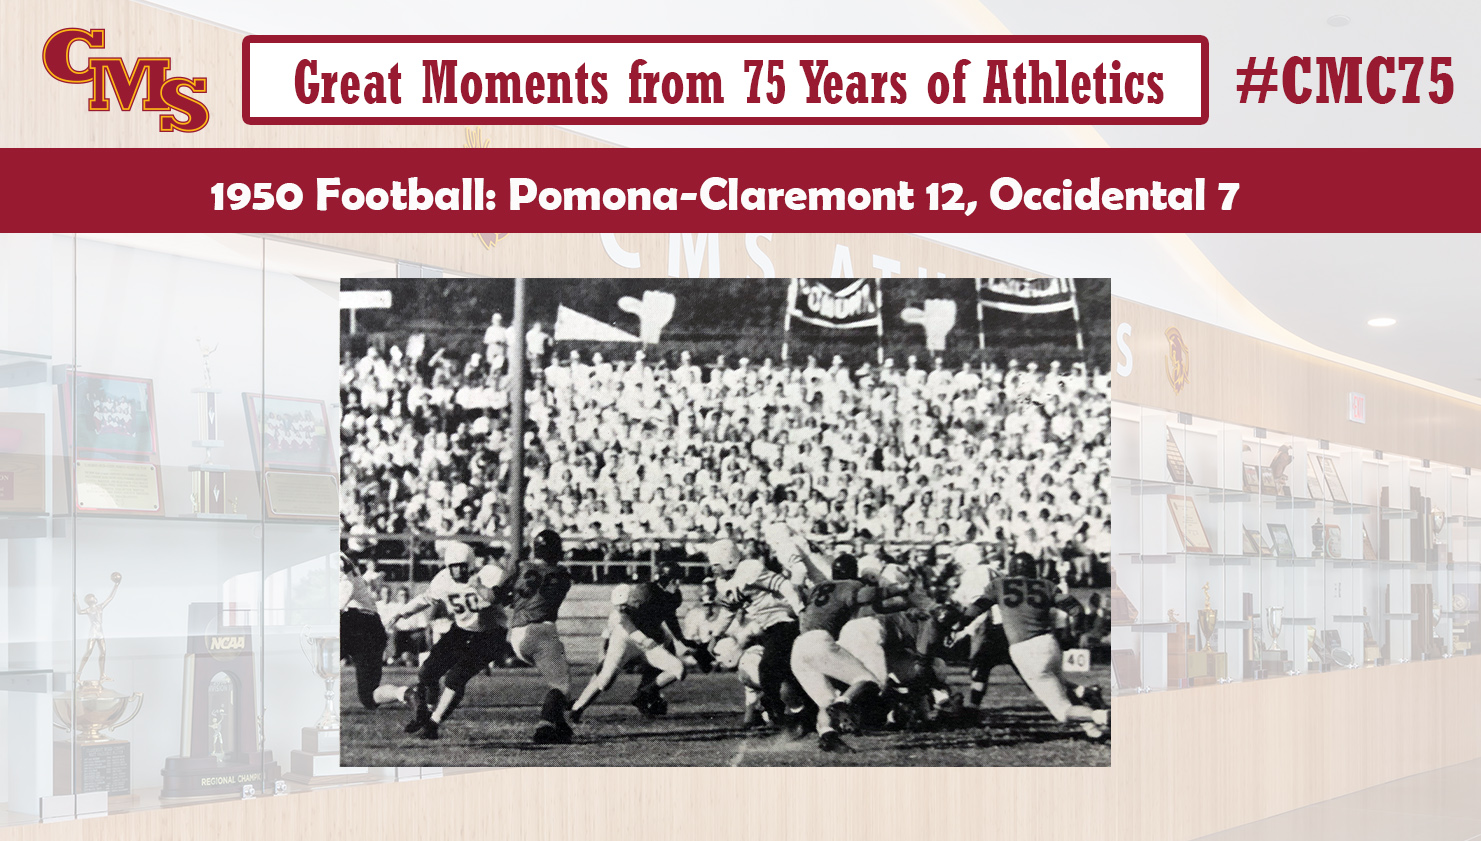 A crowd shot from a Pomona-Claremont vs. Occidental football game. Words over the photo read: Great Moments in 75 Years of Athletics, 1950 Football: Pomona-Claremont 12, Occidental 7